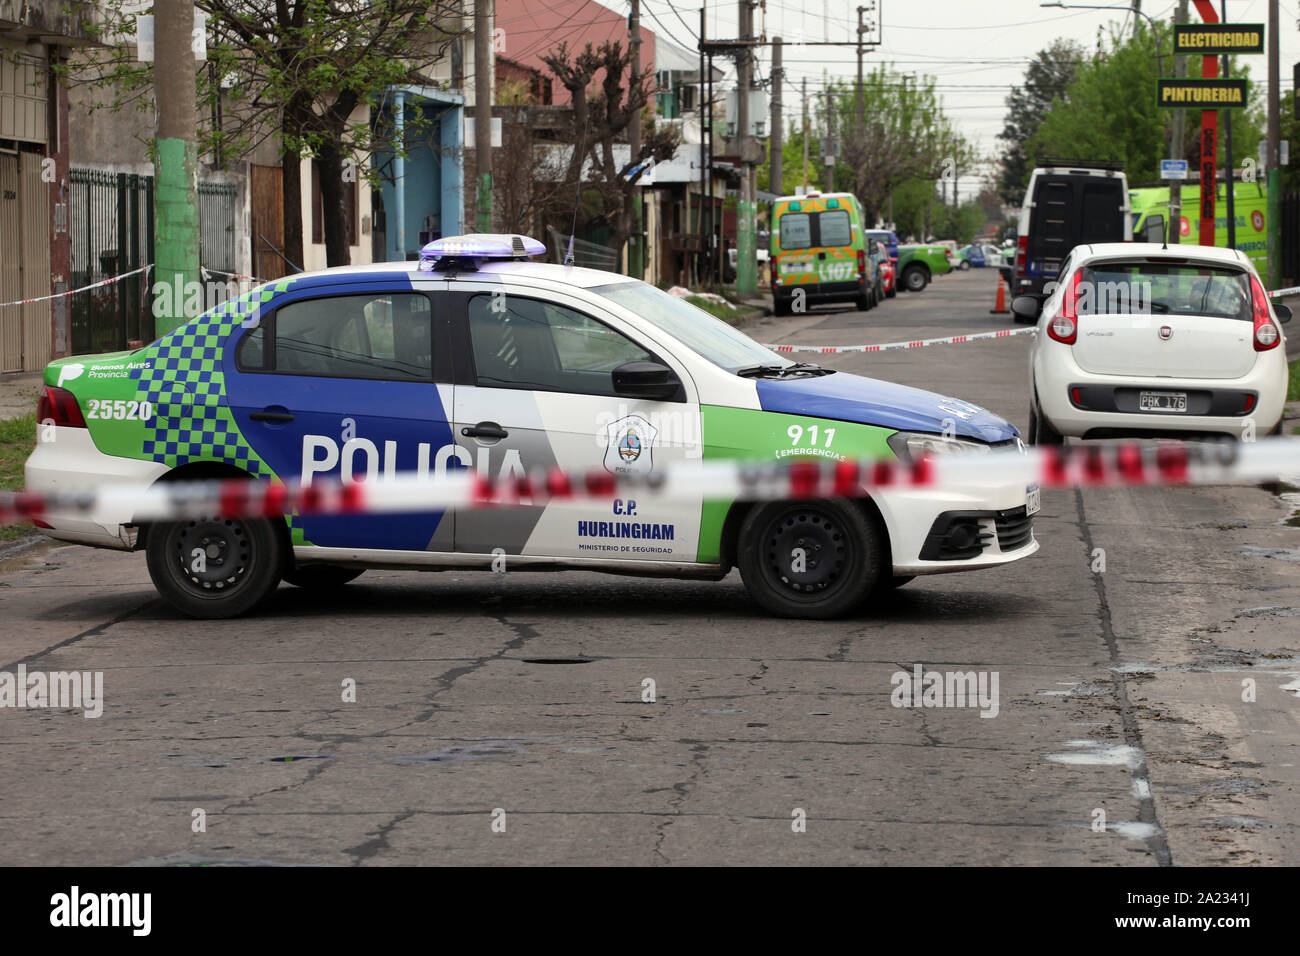 September 30, 2019, Buenos Aires, Buenos Aires, Argentina: A man slaughtered his 30-year-old daughter and buried the body in the backyard of his house. The brutal femicide shakes society. (Credit Image: © Claudio Santisteban/ZUMA Wire) Stock Photo